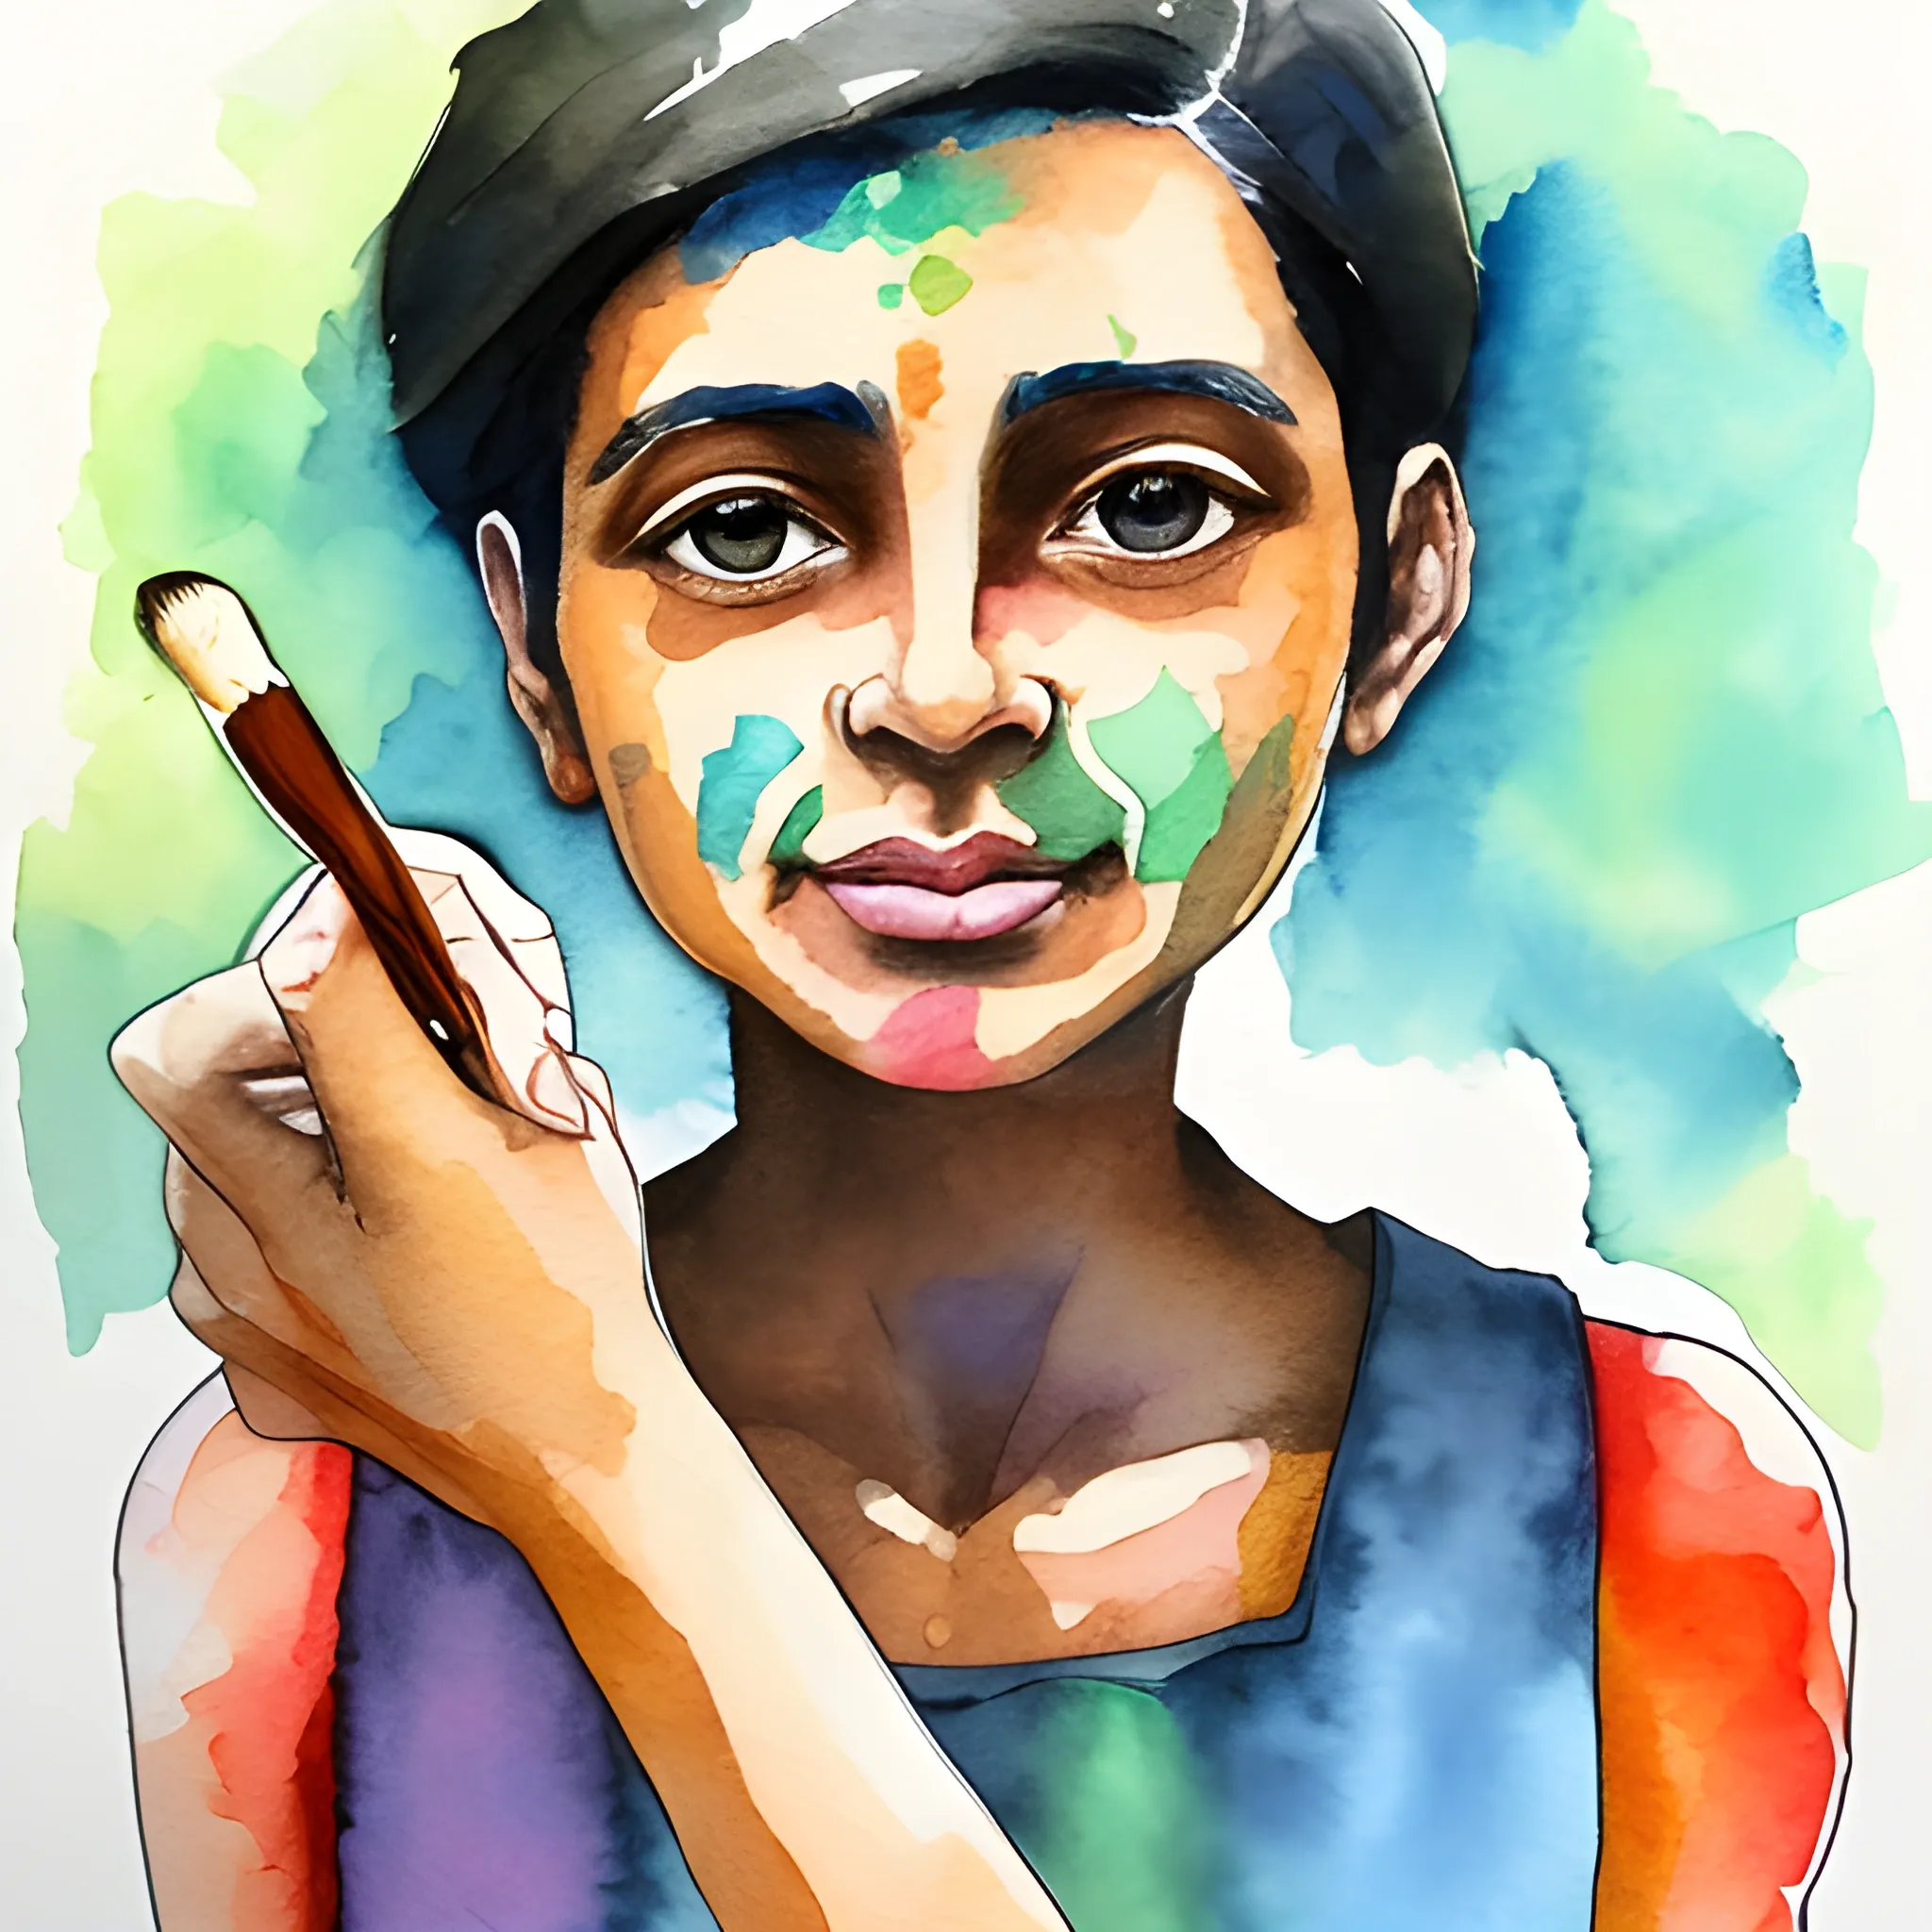 Image that represents the ethical values that must be exhibited by those who practice philanthropy, Water Color